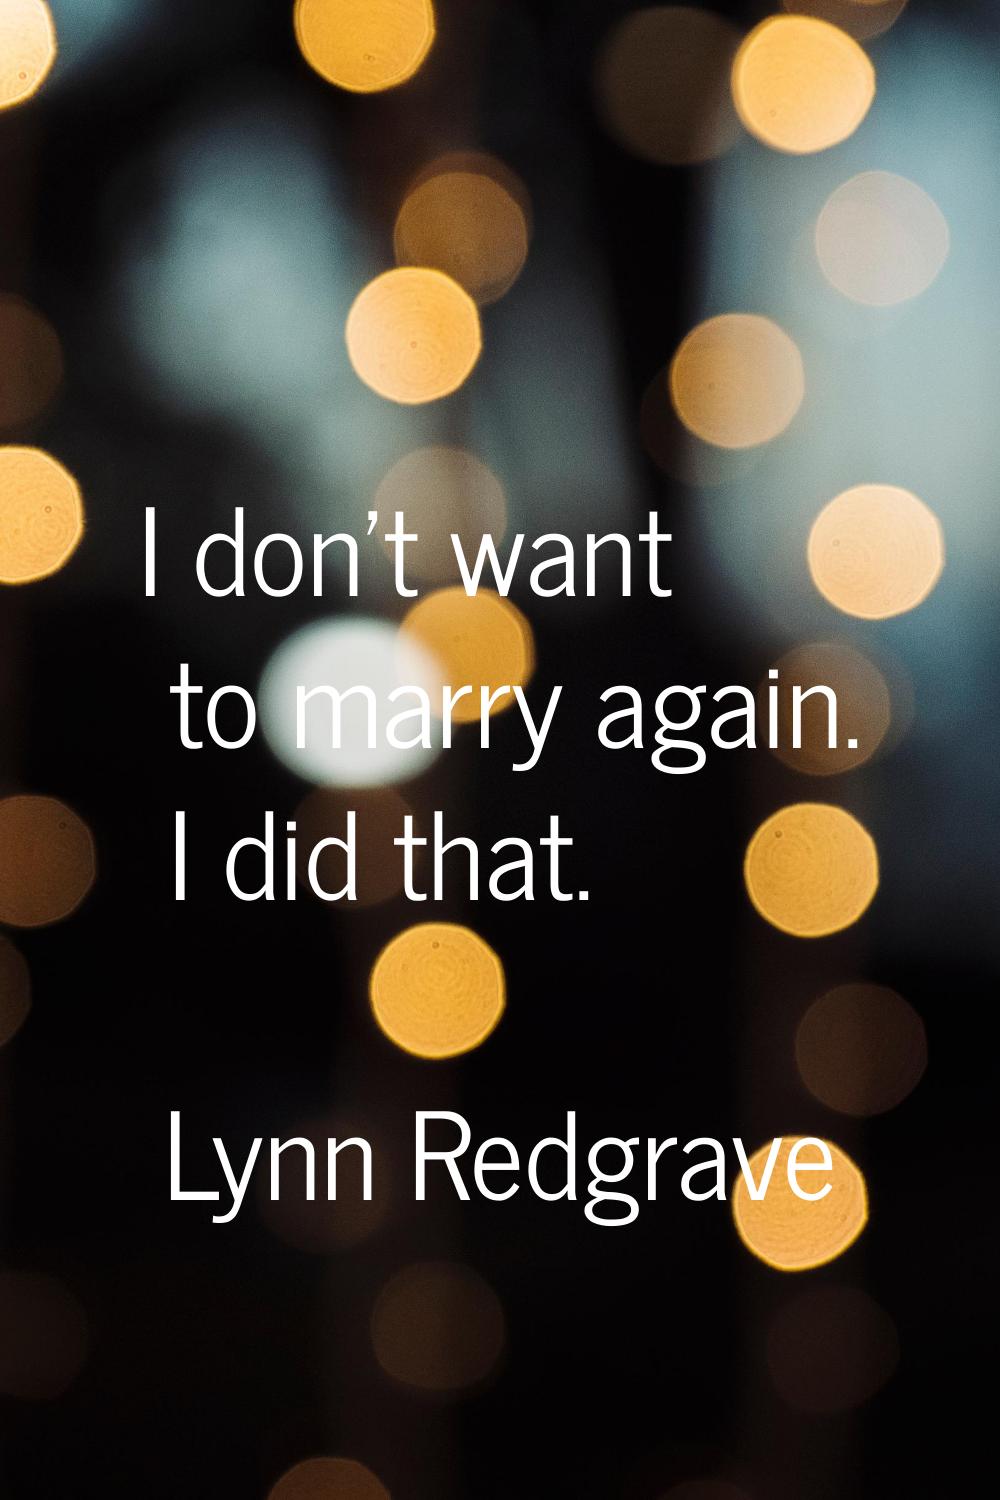 I don't want to marry again. I did that.